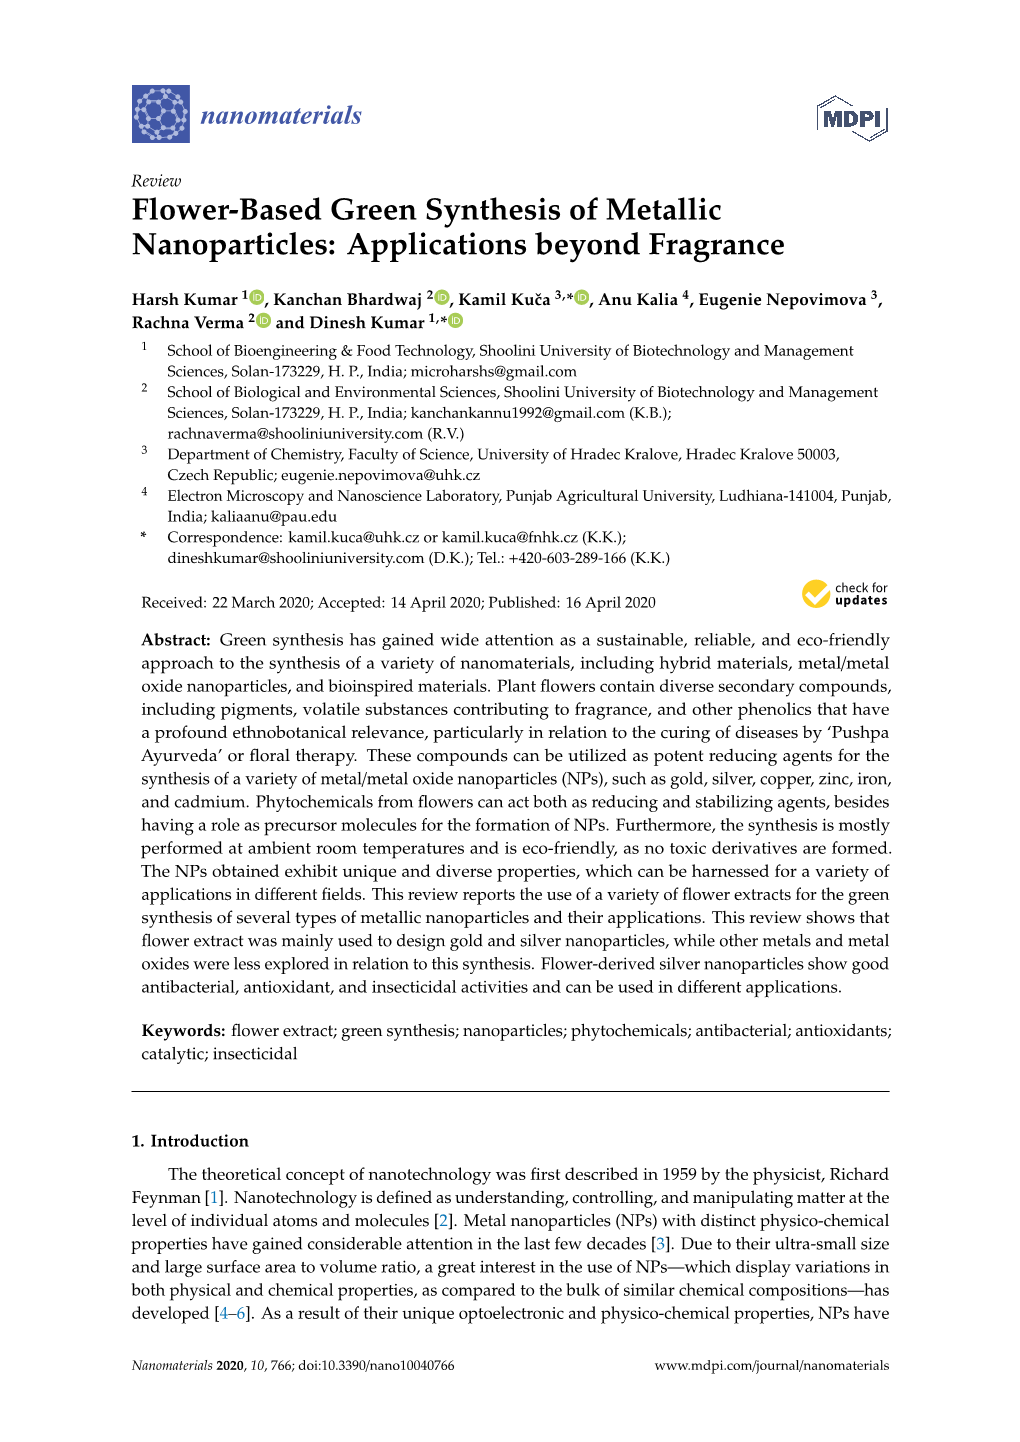 Flower-Based Green Synthesis of Metallic Nanoparticles: Applications Beyond Fragrance